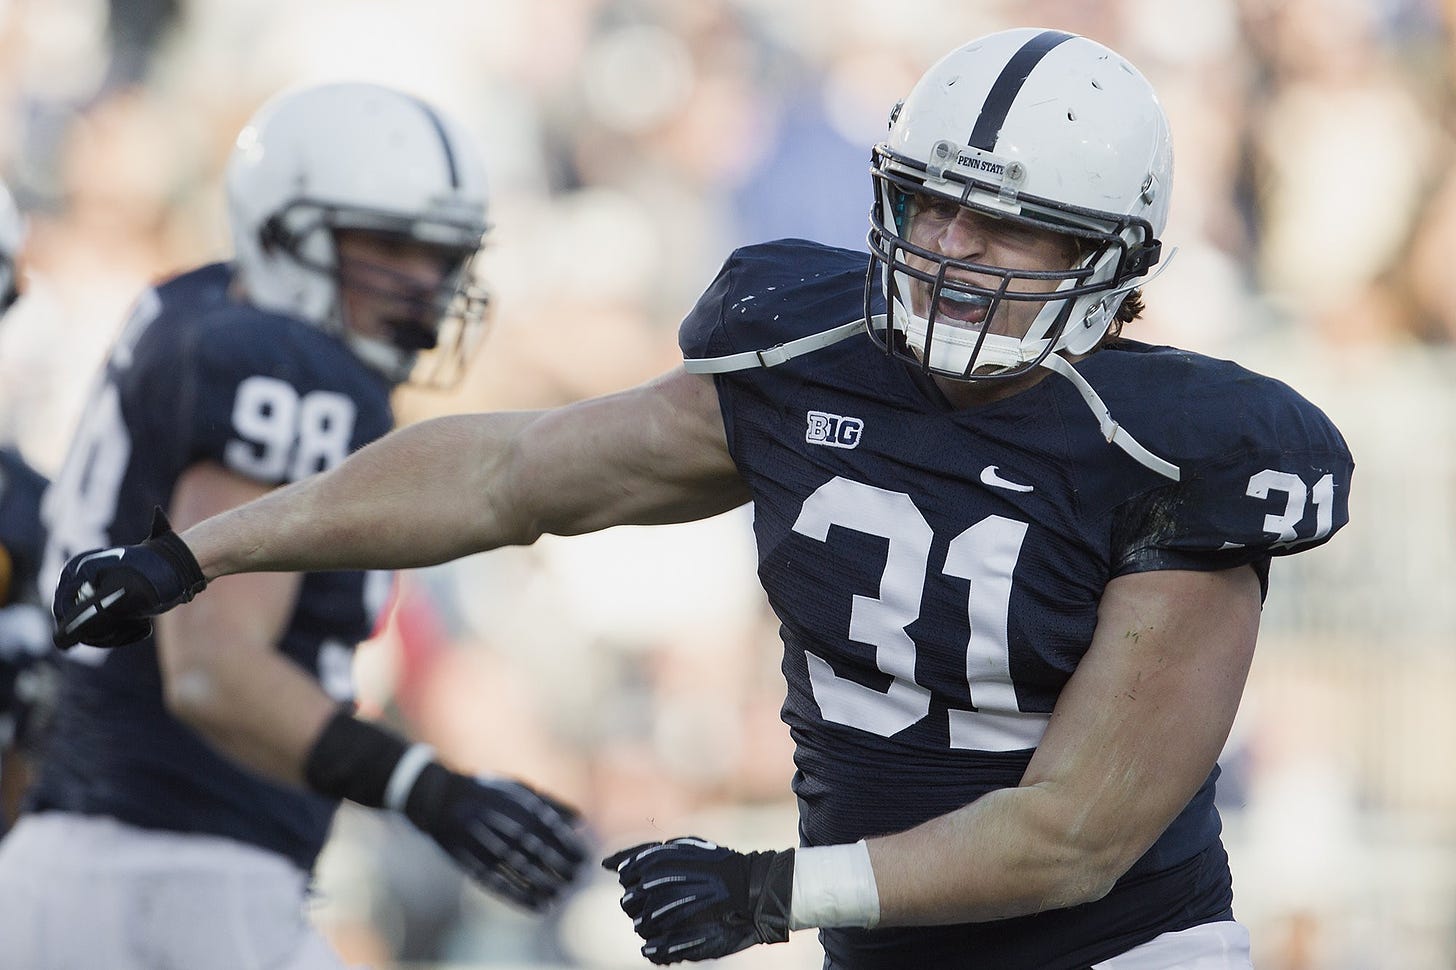 Penn State DE Brad Bars more focused than ever in return to football field  - pennlive.com